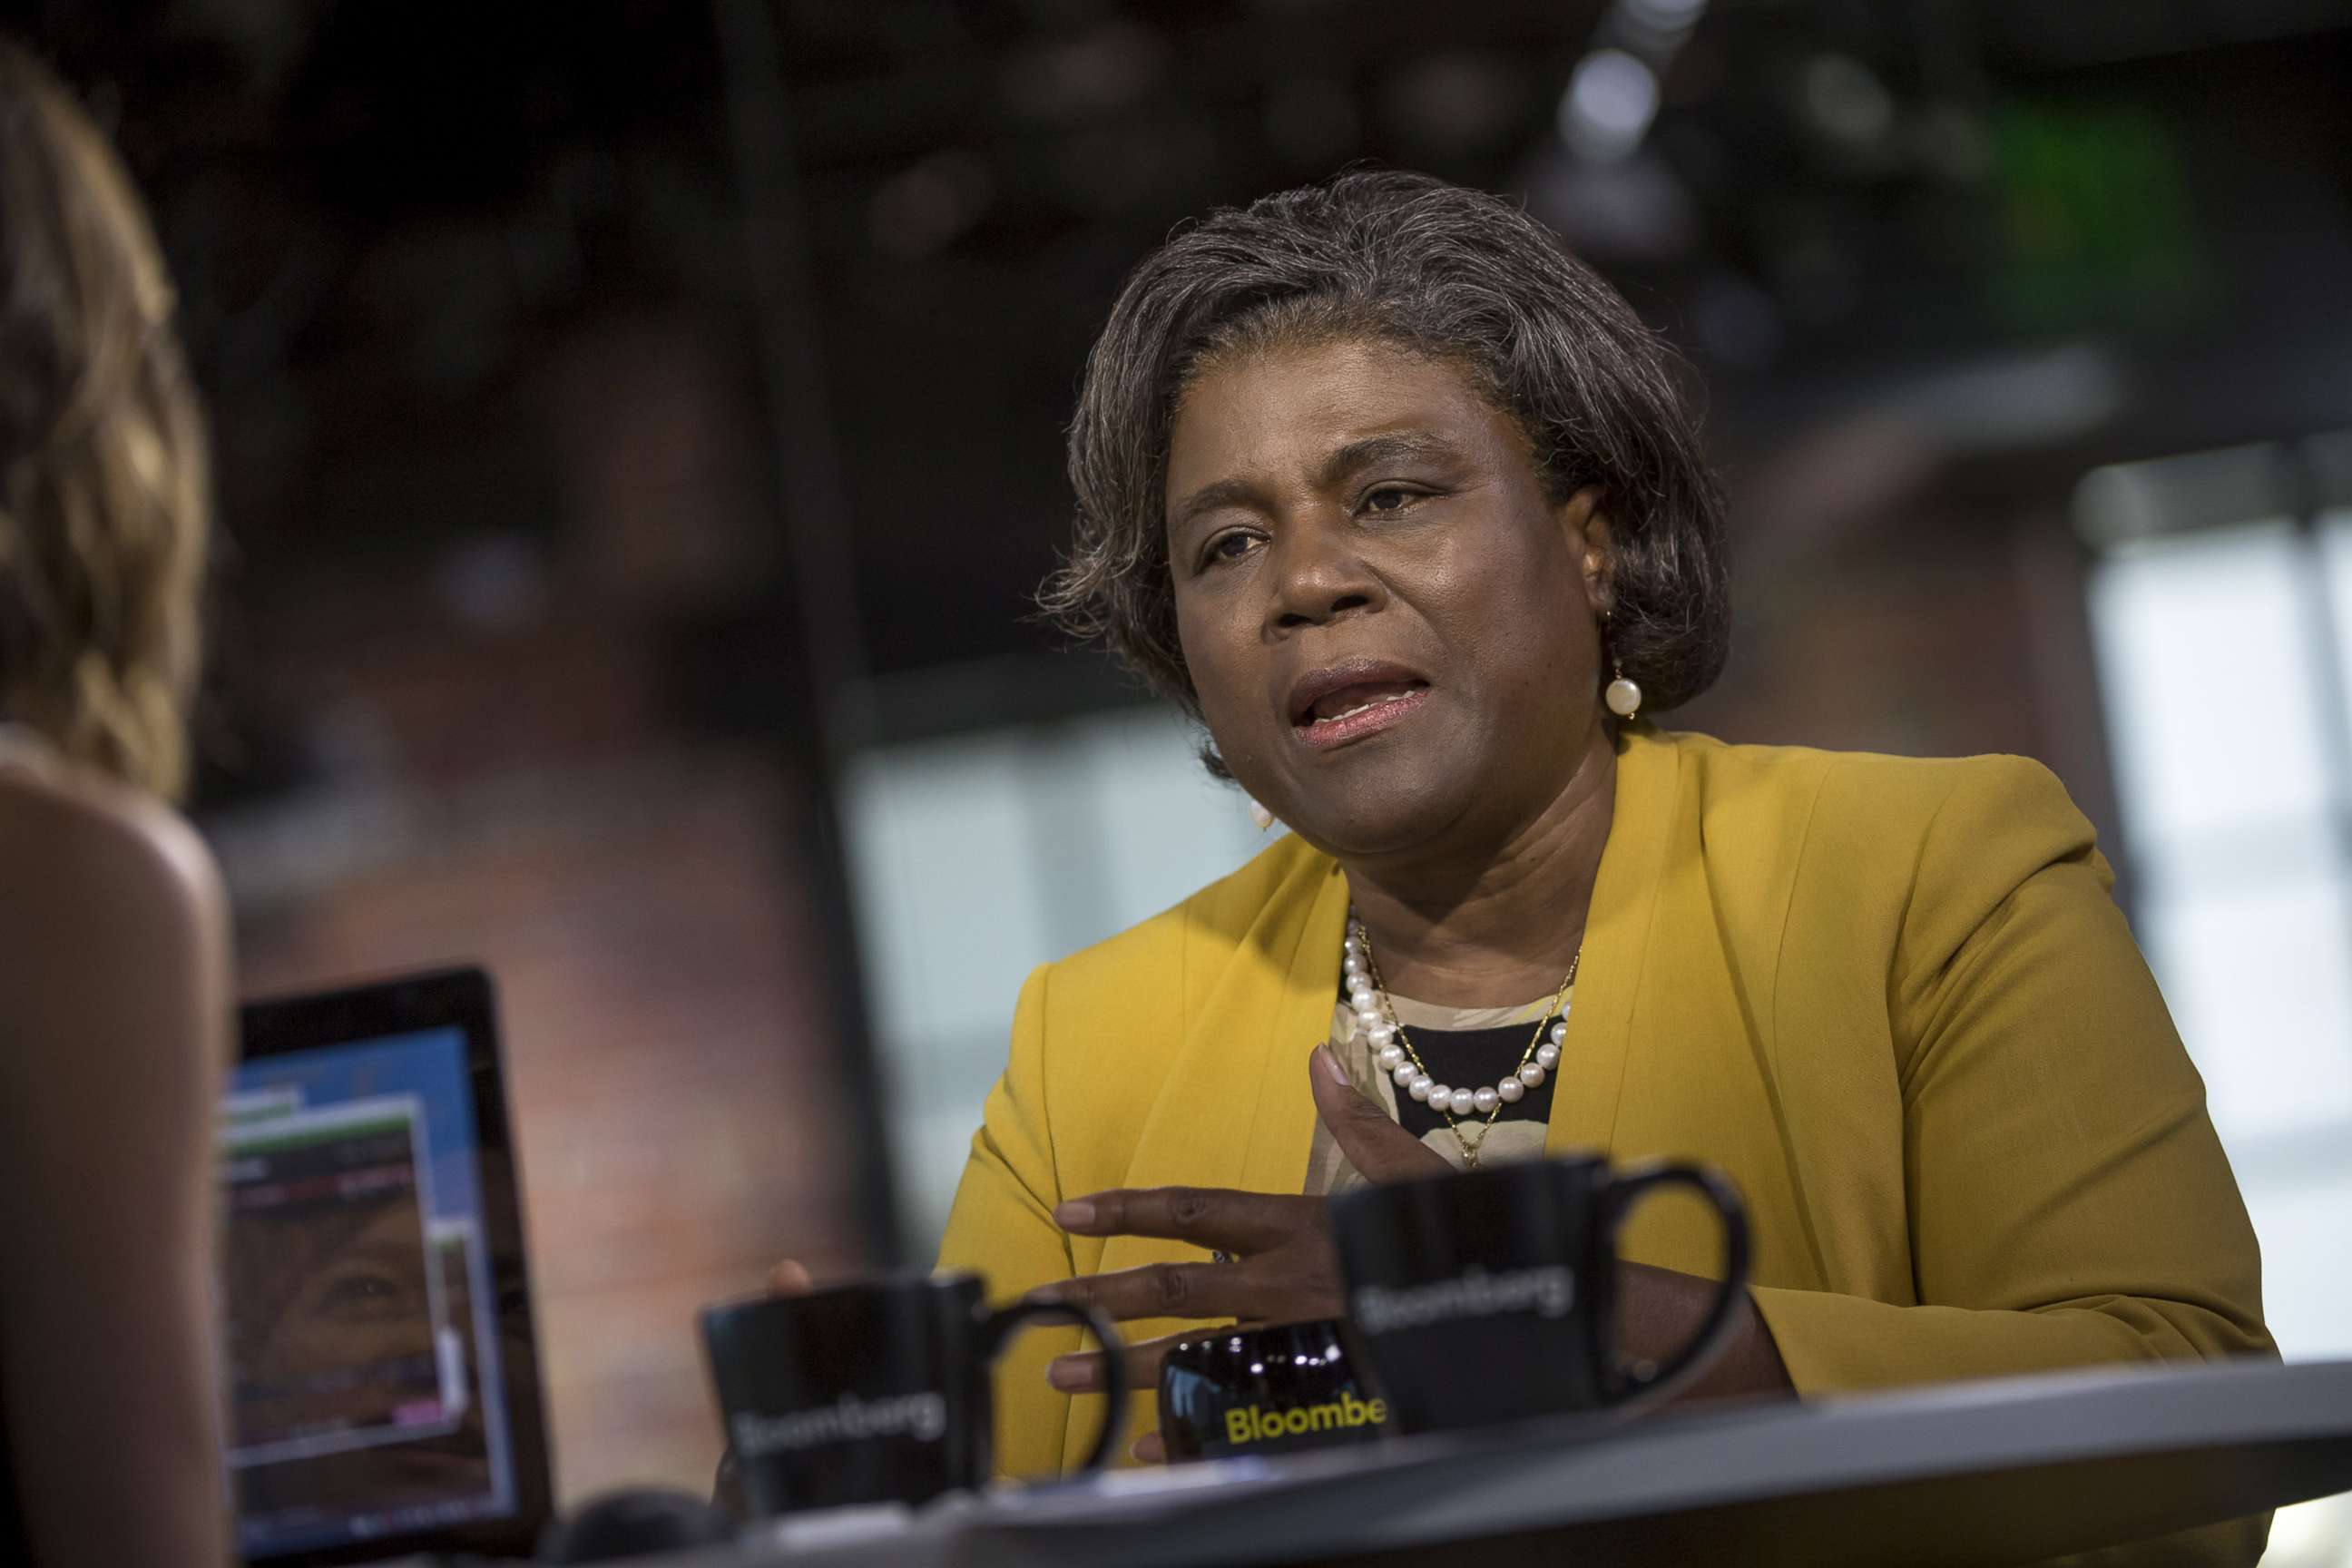 PHOTO: In this file photo, Linda Thomas-Greenfield speaks during a Bloomberg West Television interview in San Francisco, May 31, 2016.